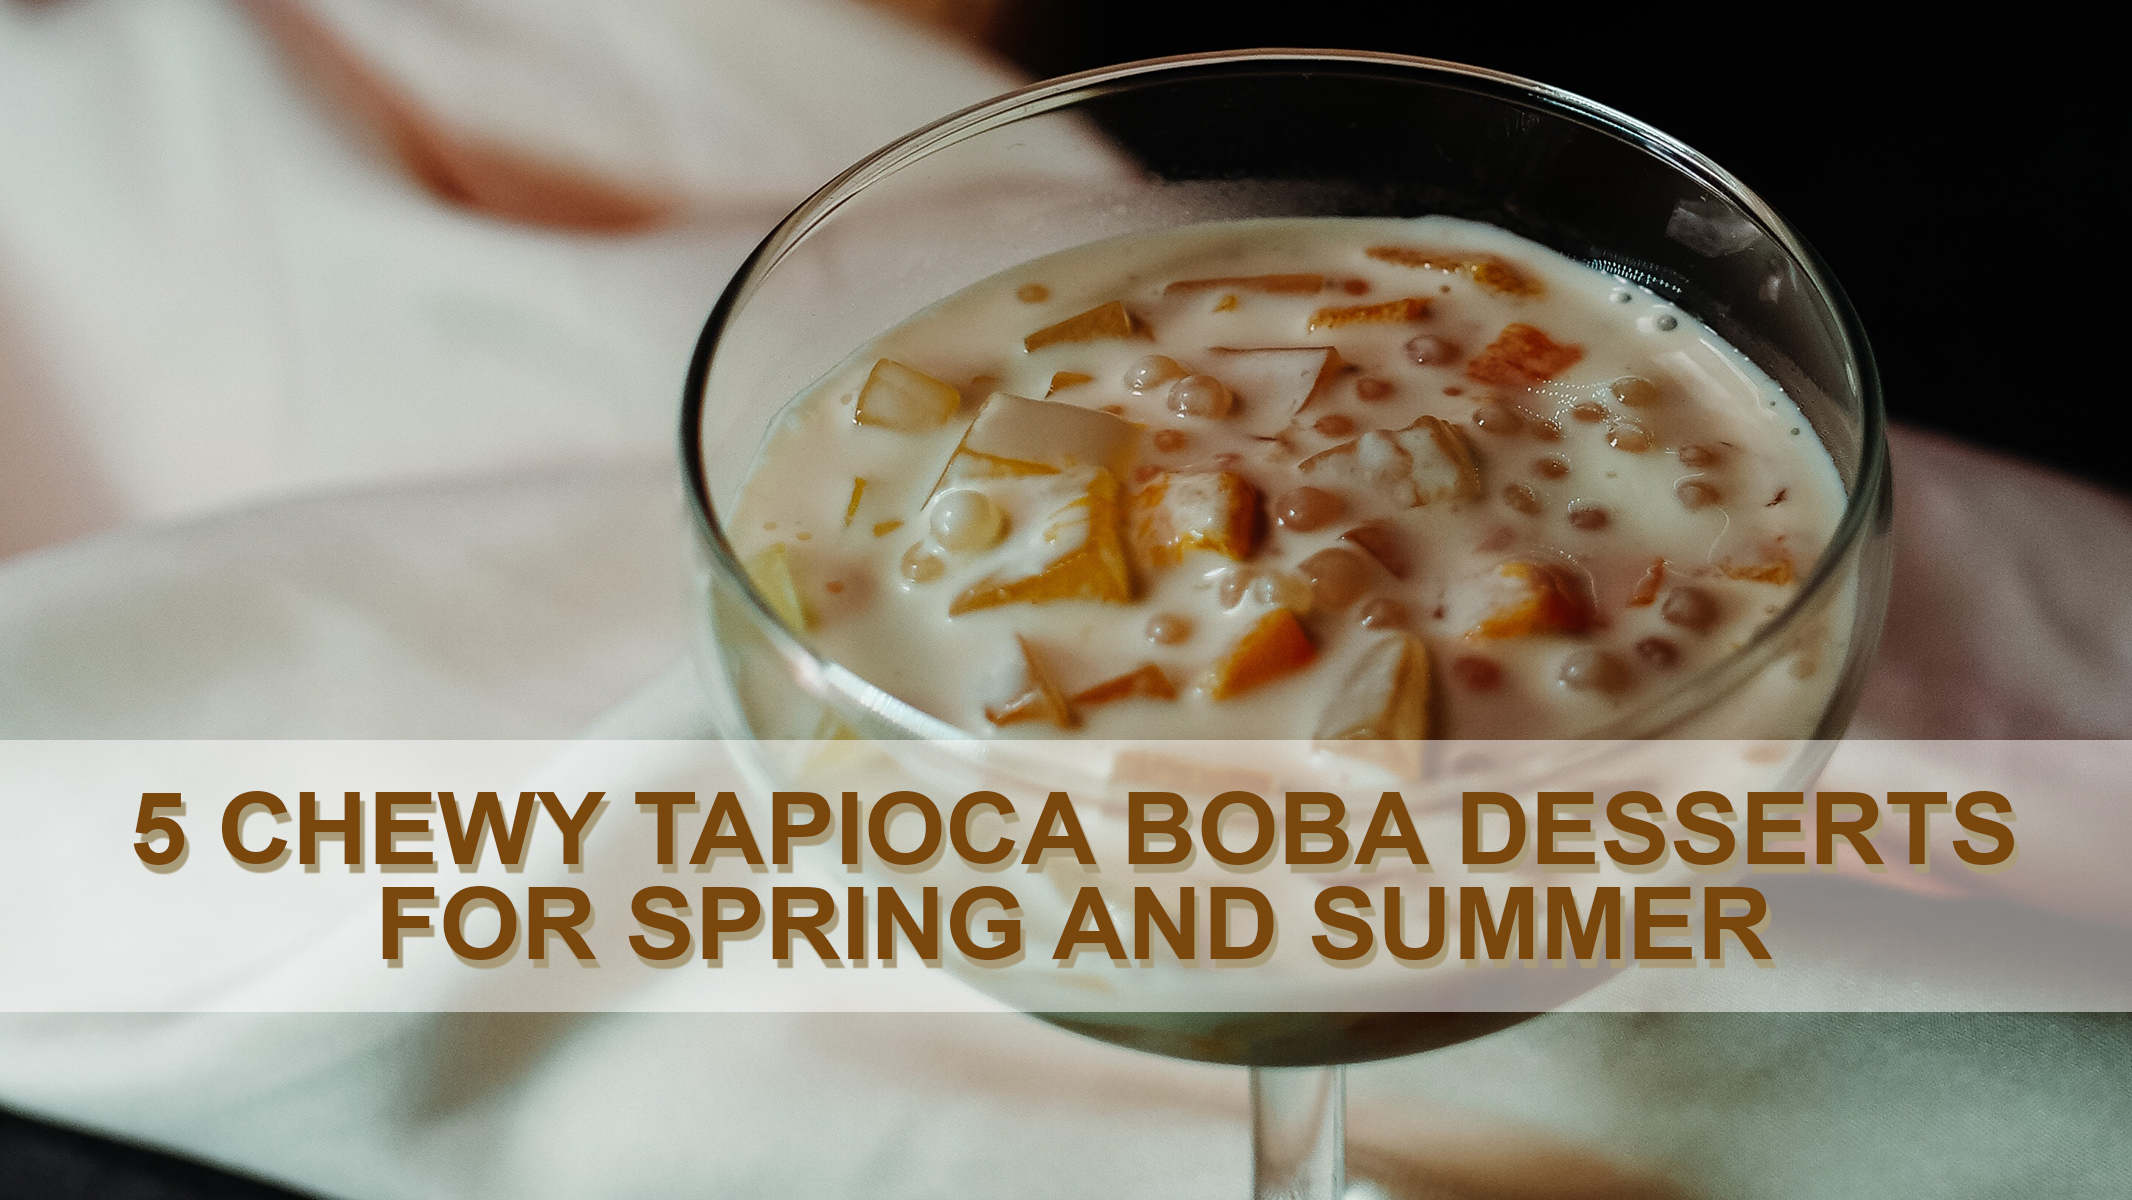 5 Chewy Tapioca Boba Desserts for Spring and Summer